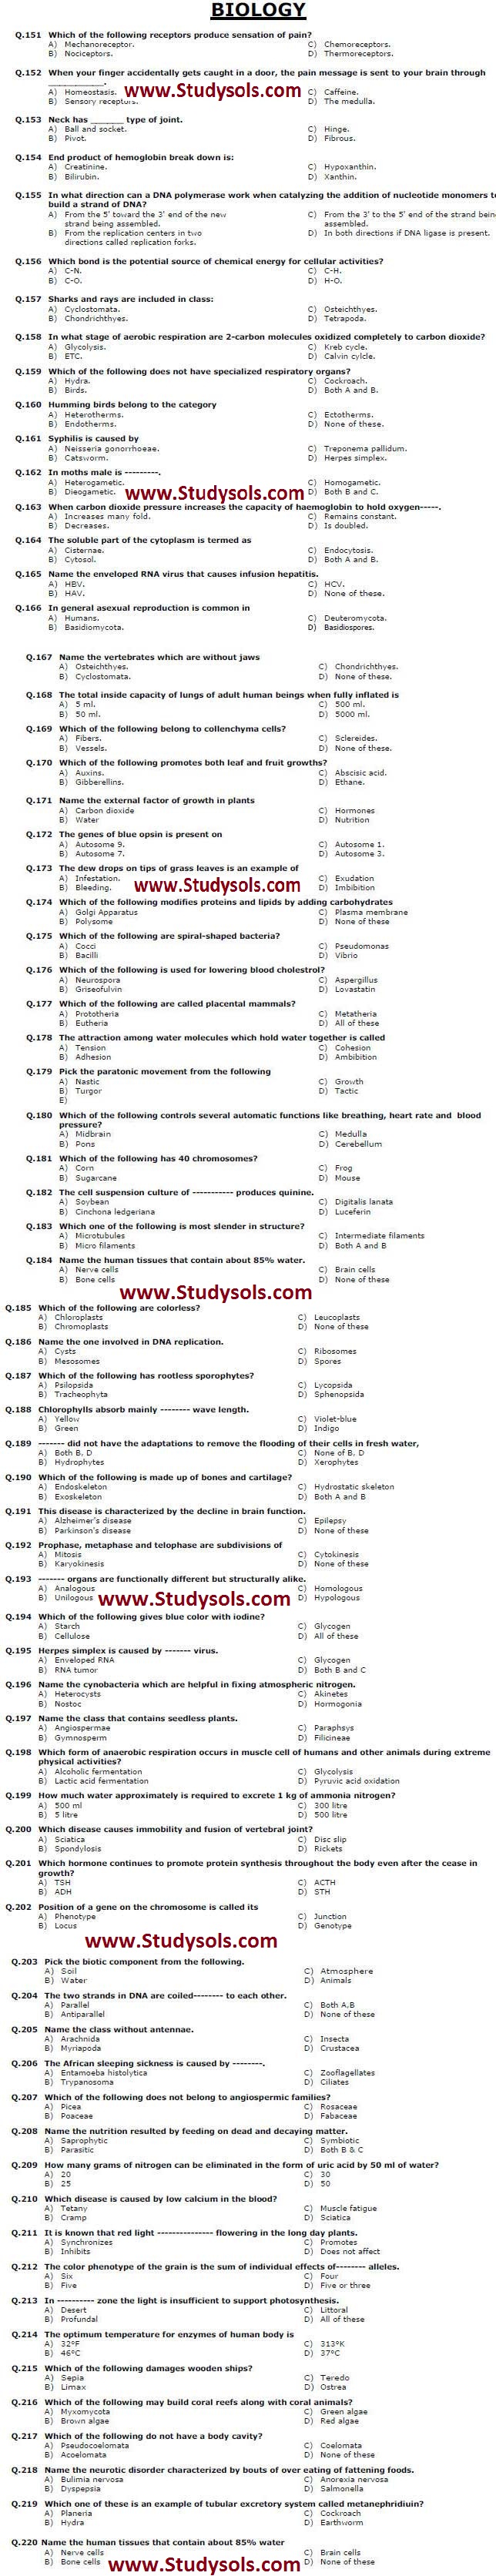 MCAT Entry Test MCQ’s For the Medical SAMPLE BAO